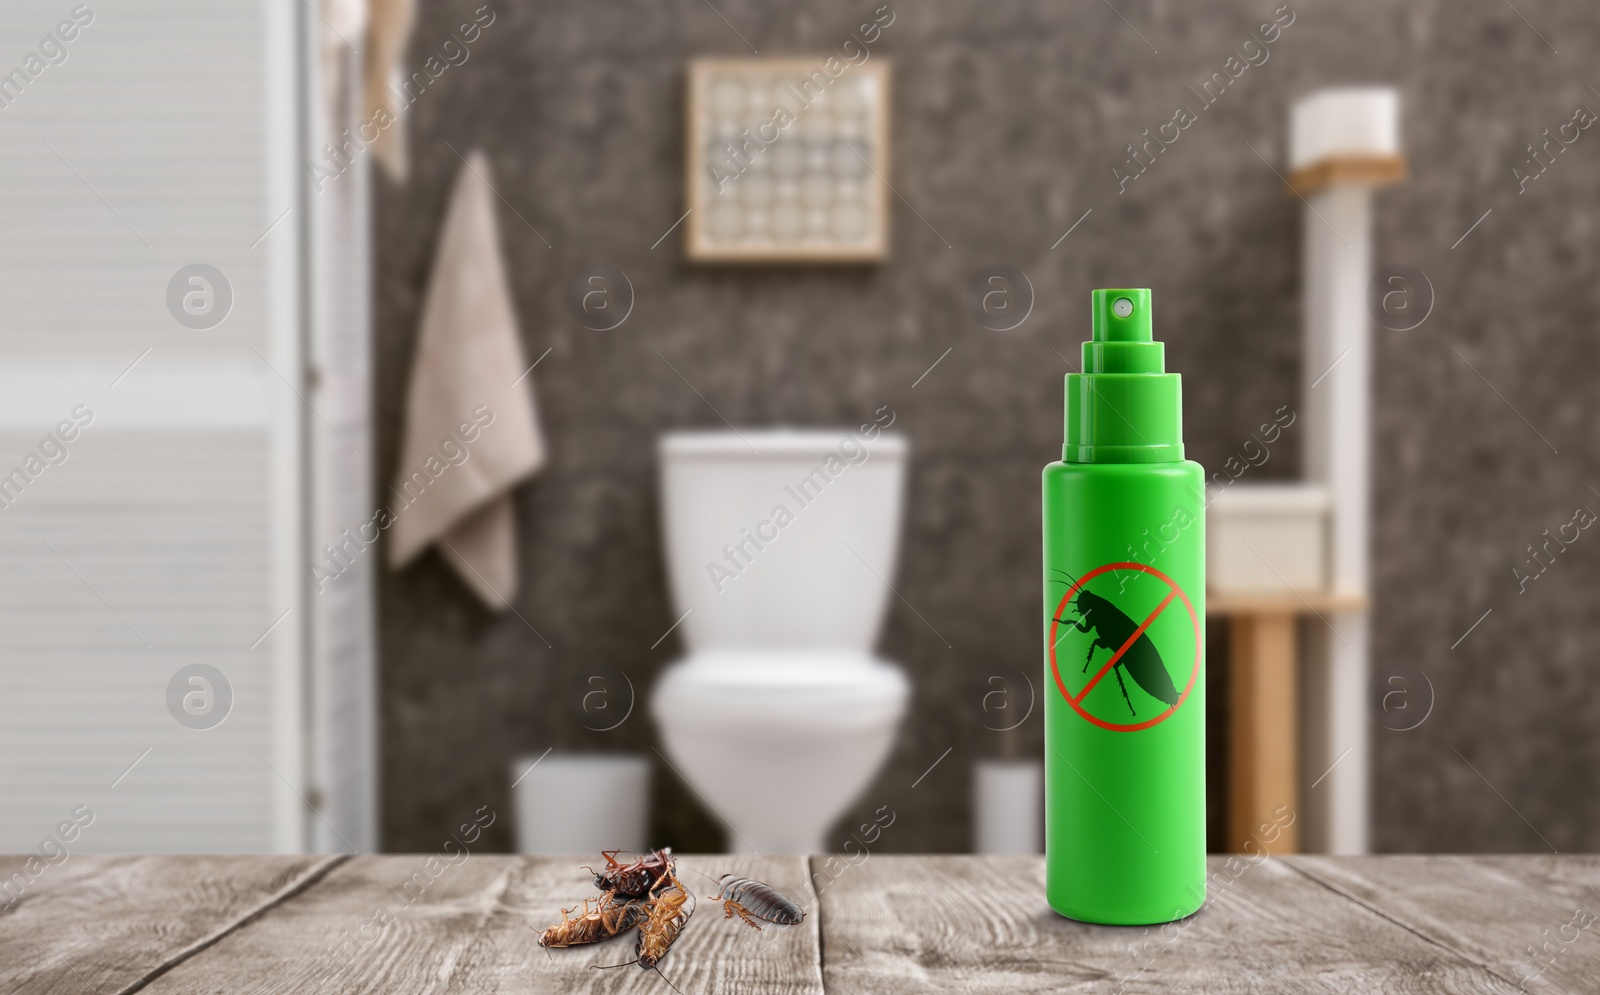 Image of Pest control. Insecticide and dead cockroaches on table in bathroom, space for text